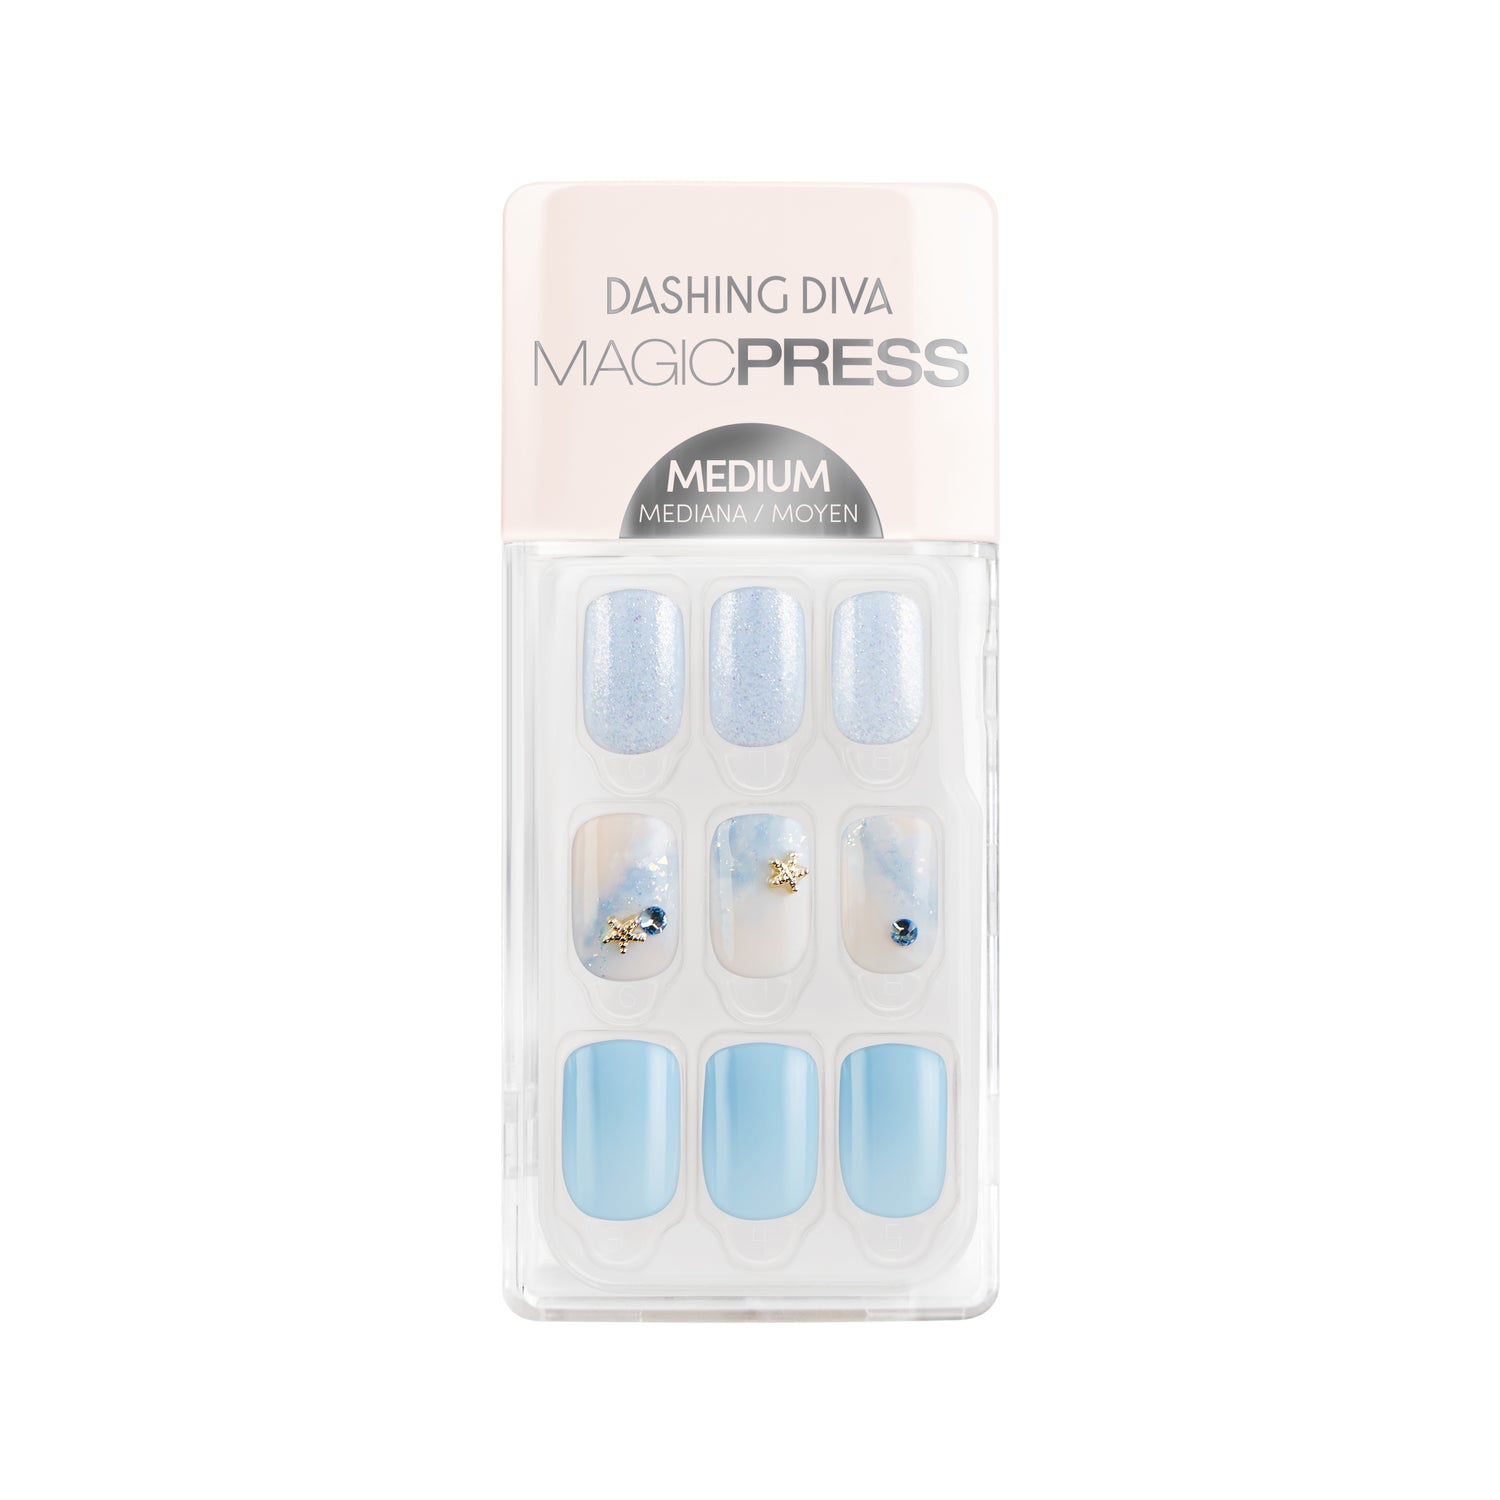 Dashing Diva MAGIC PRESS medium, square baby blue press on gel nails with shimmer, rhinestone, and starfish accents.